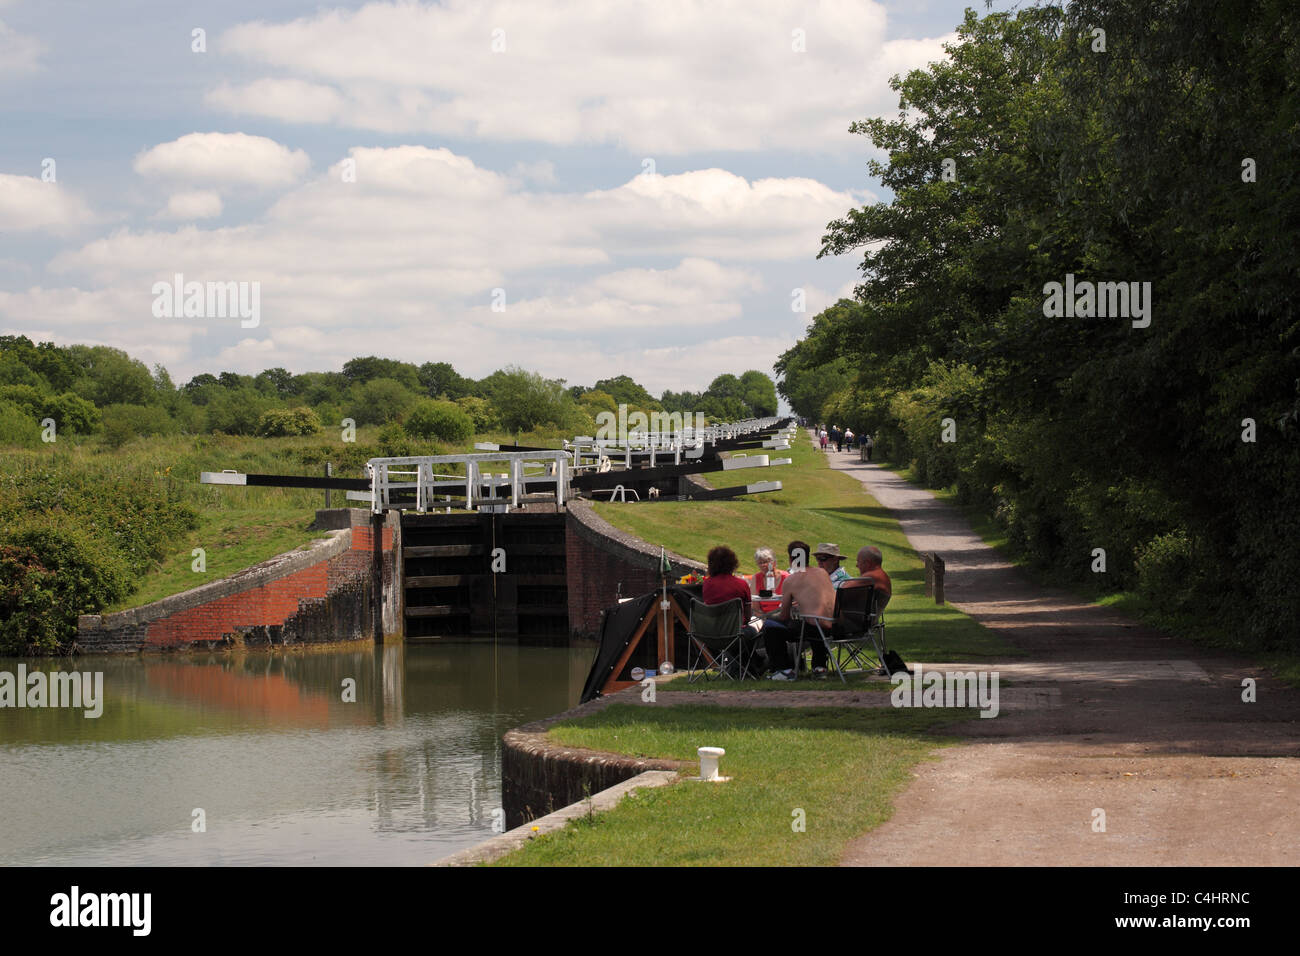 Family enjoying a picnic at Caen Hill locks, Kennet and Avon canal, Wiltshire, England, UK Stock Photo